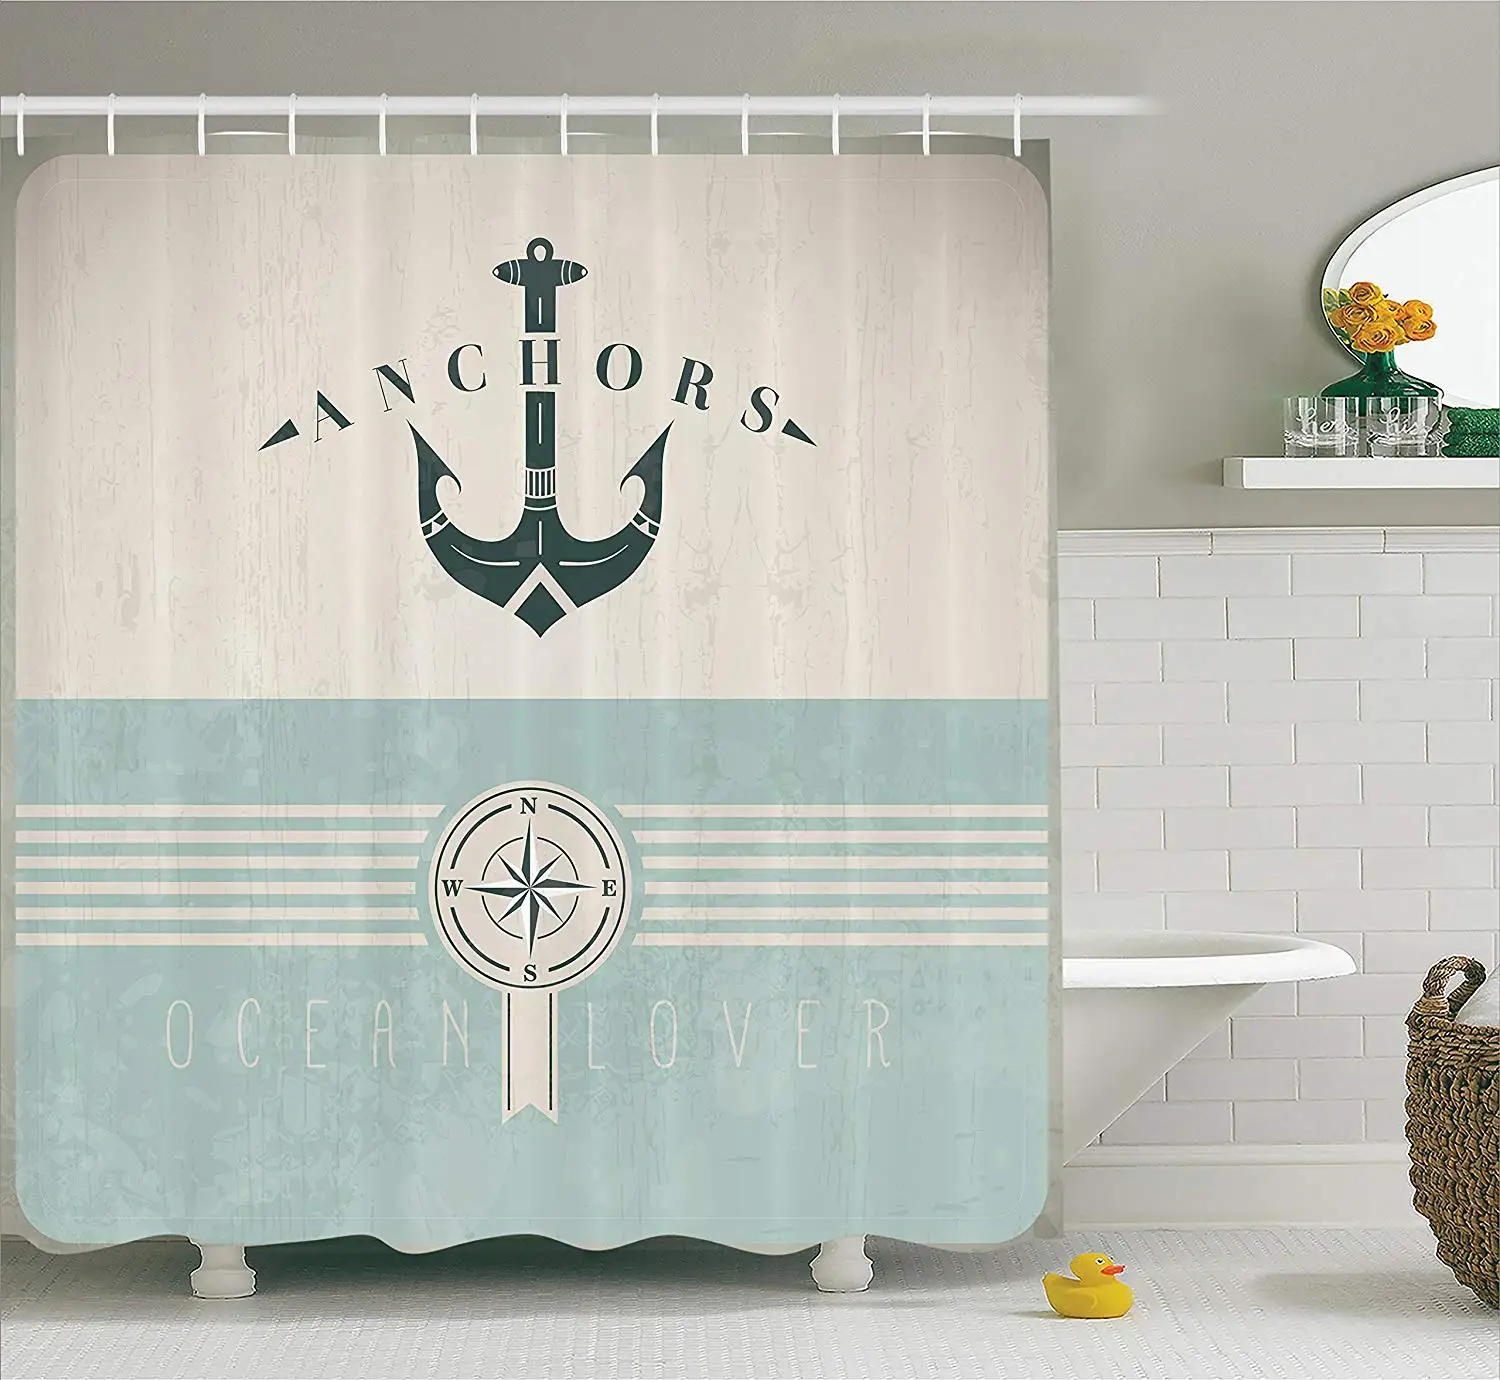 

Ocean Decor Shower Curtain, Nautical Anchor Sailor Sea Directions Antiqued Theme, Beige Turquoise and Dark Green